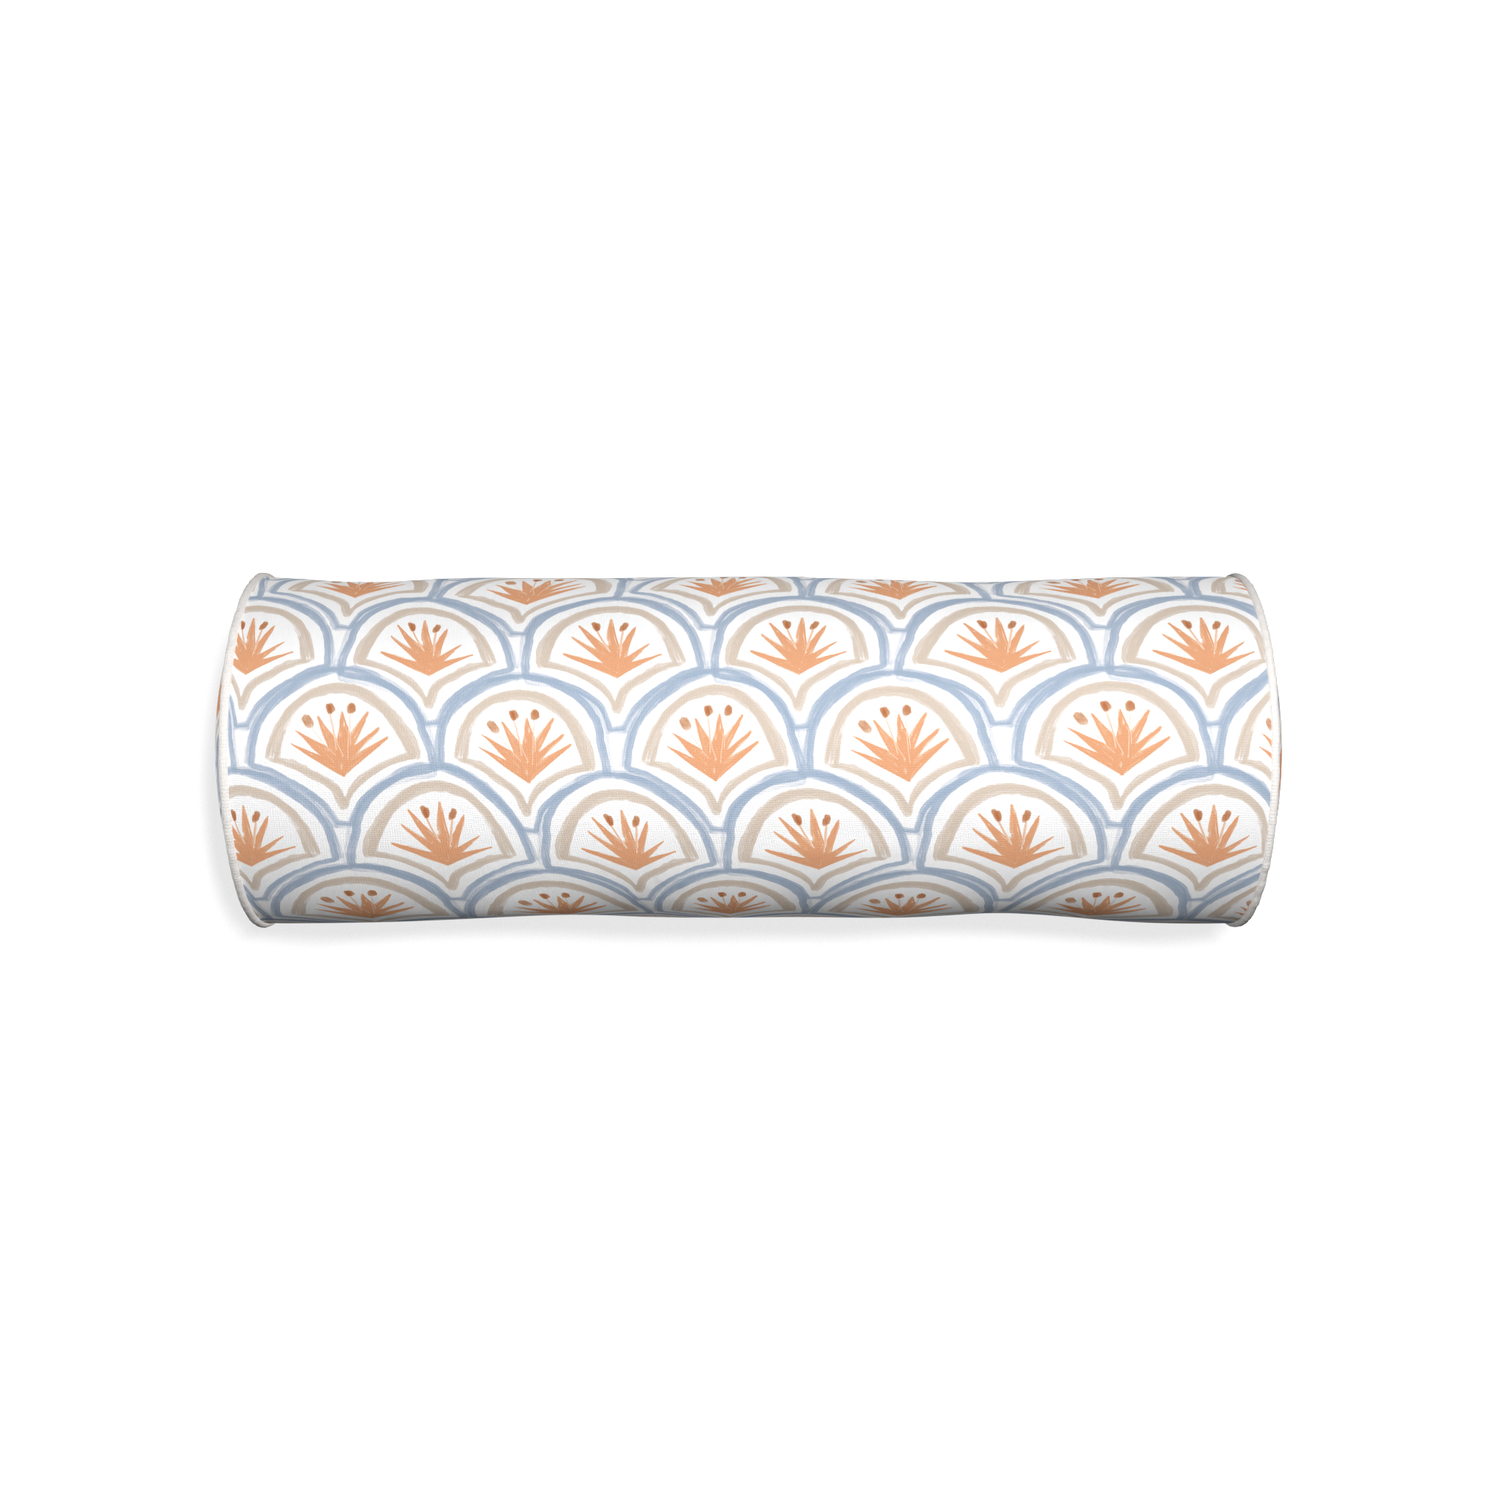 Bolster thatcher apricot custom art deco palm patternpillow with snow piping on white background